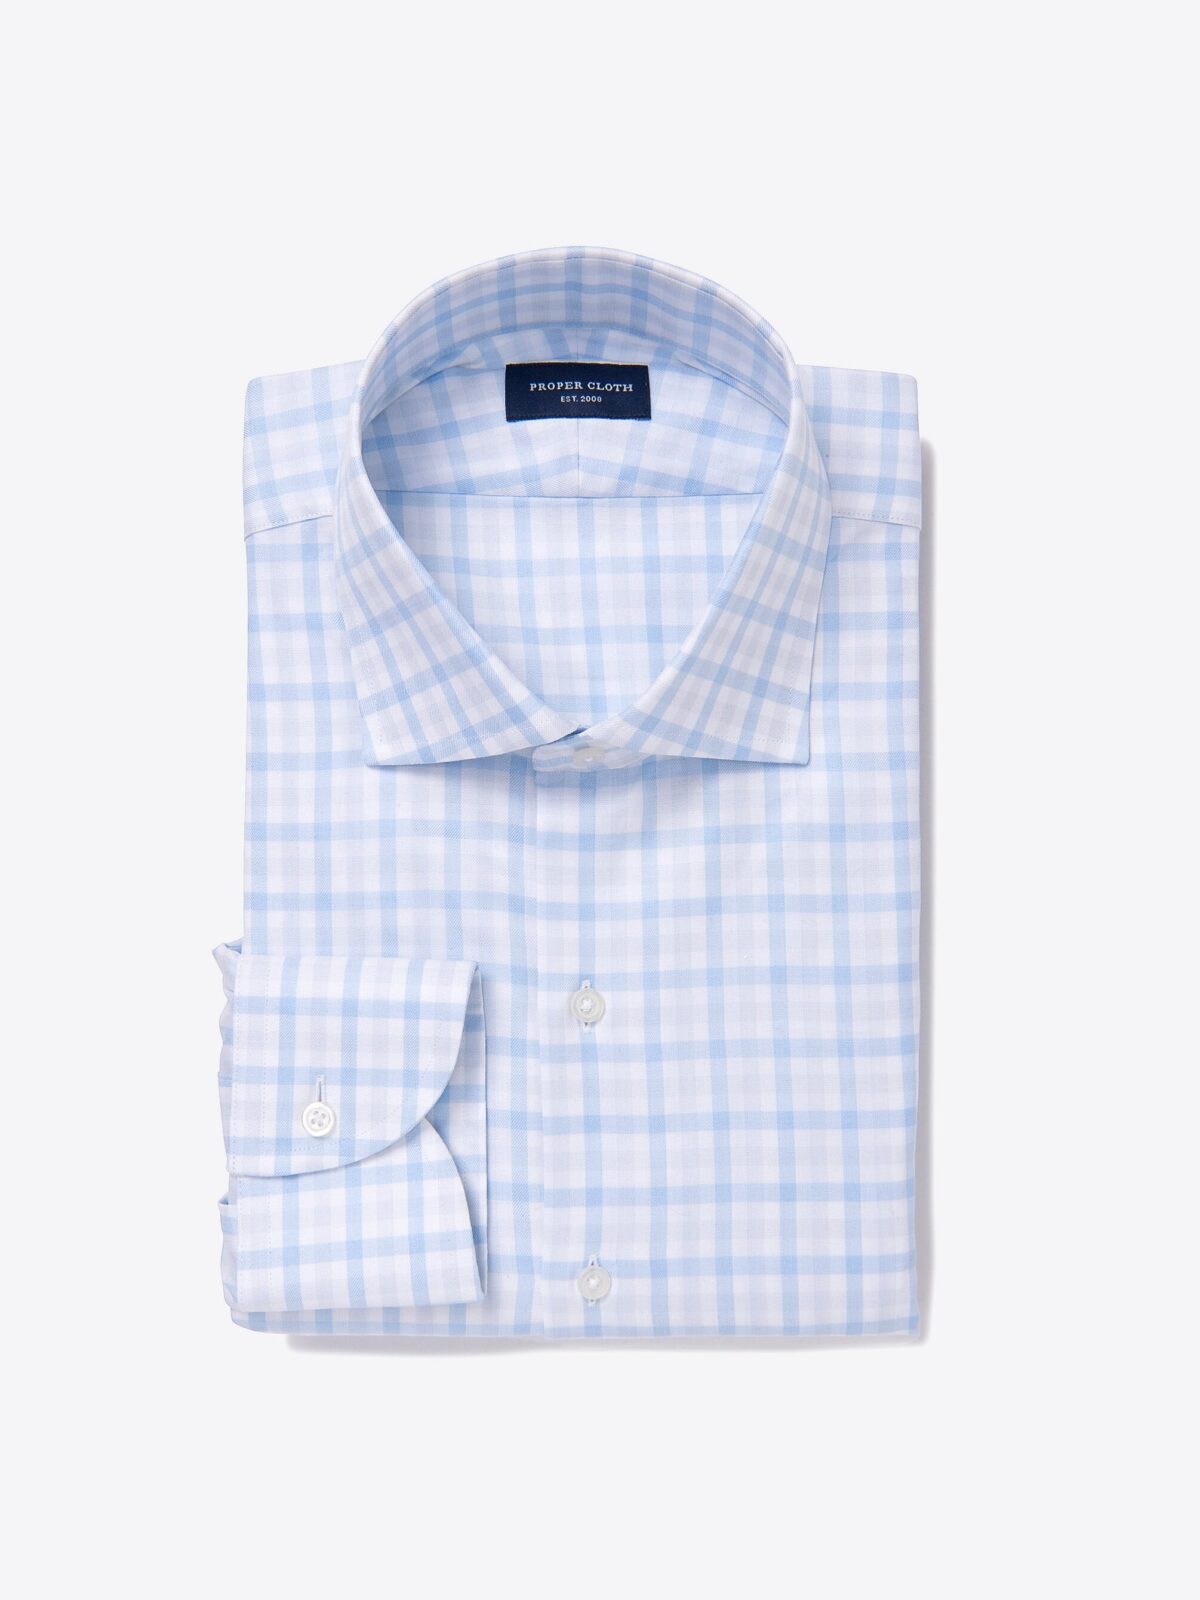 Lucca Grey and Sky Blue Multi Gingham Men's Dress Shirt Shirt by Proper ...